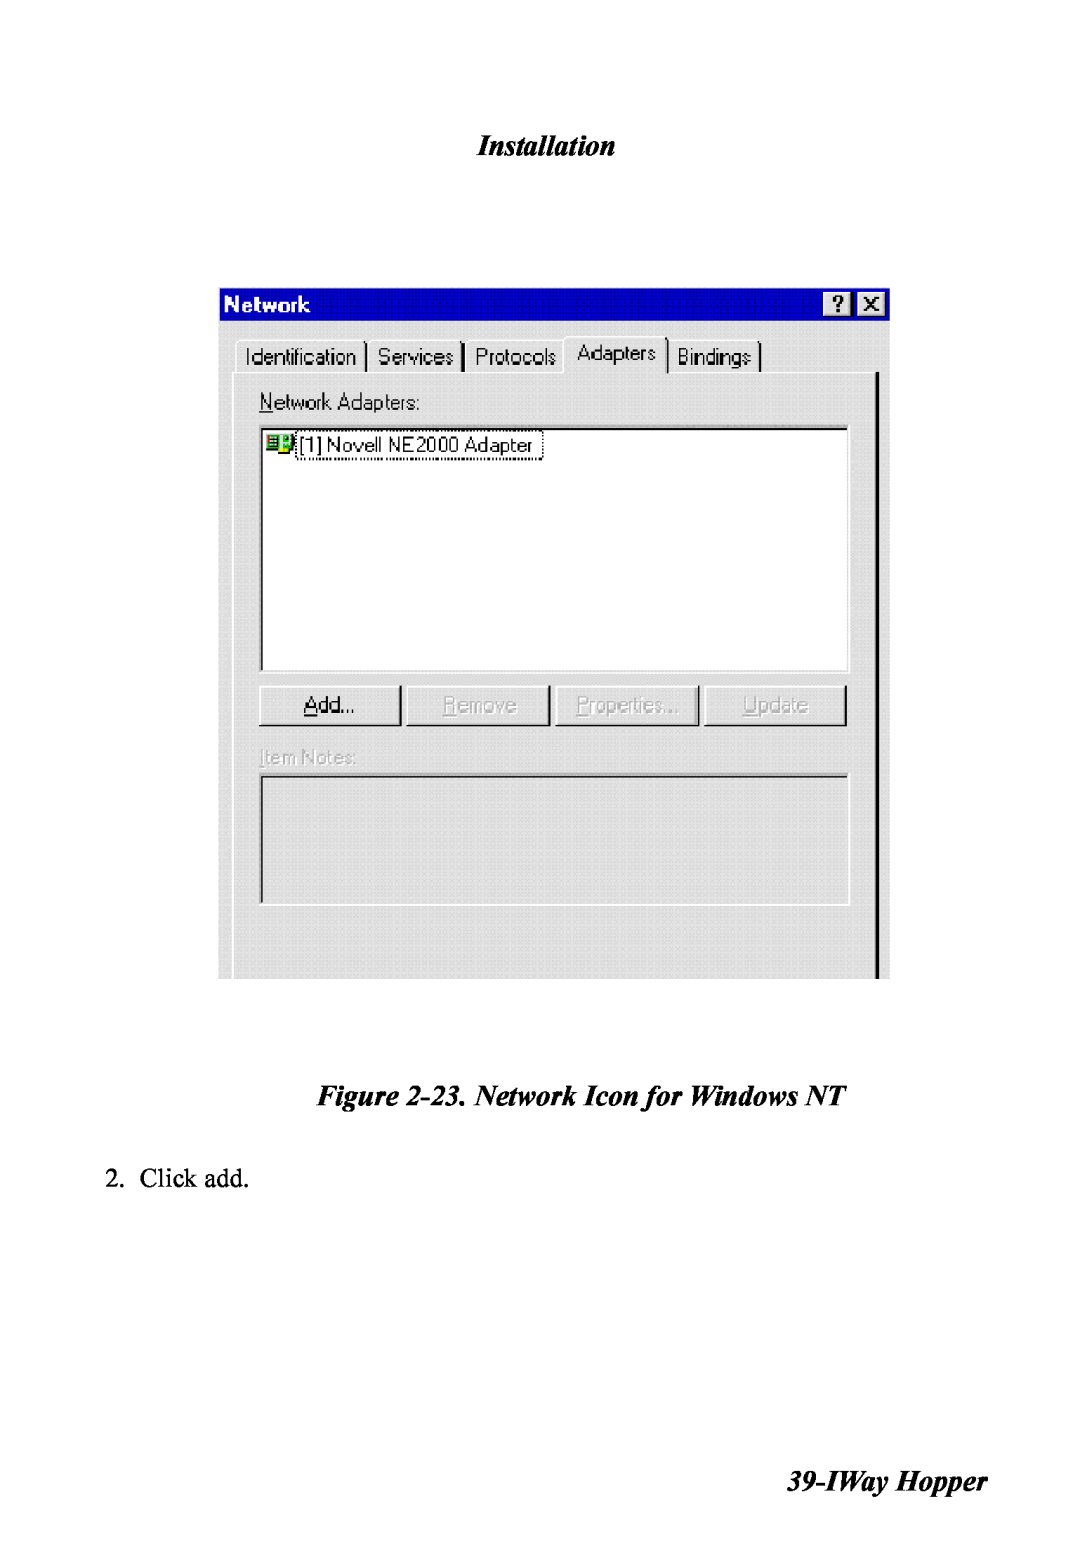 Multitech MT128ISA-UD, MT128ISA-SD, MT128ISA-SV manual Installation -23. Network Icon for Windows NT, IWay Hopper, Click add 